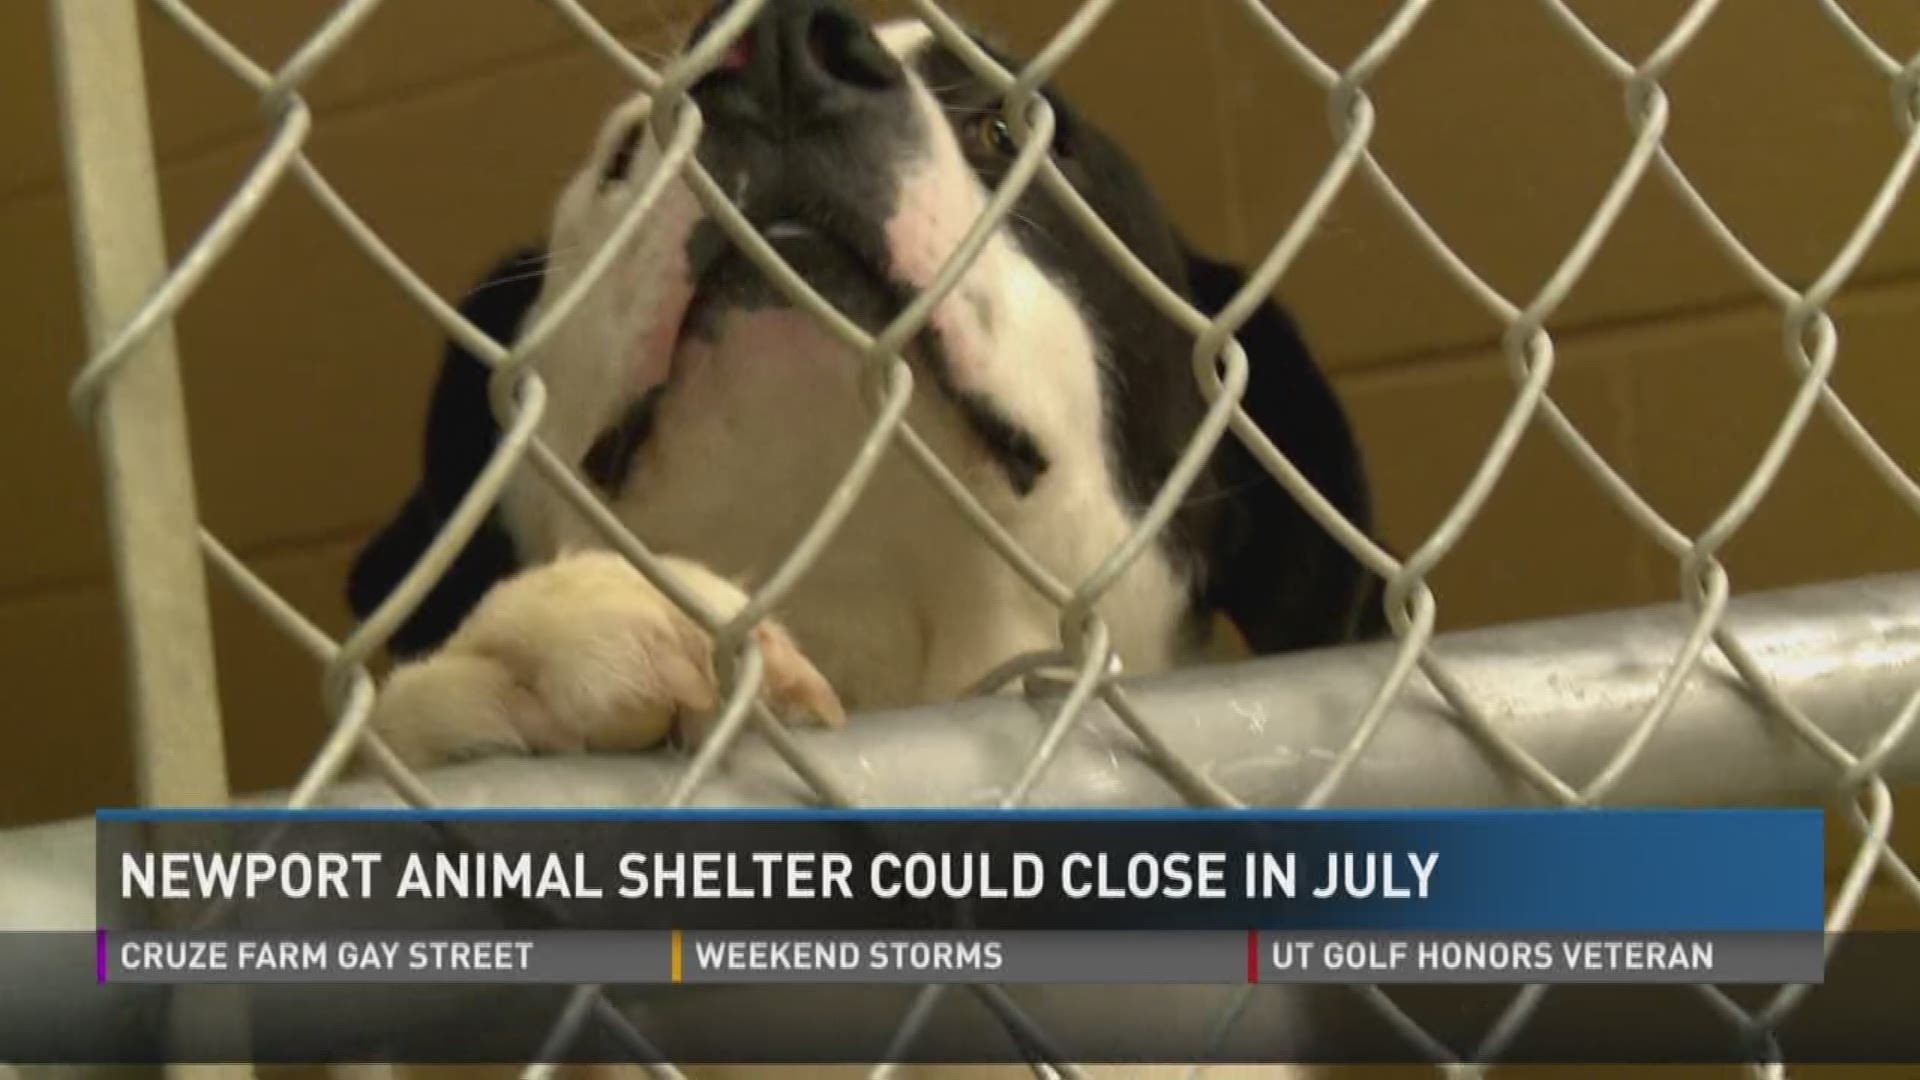 A Newport animal shelter is at risk of closing in July.